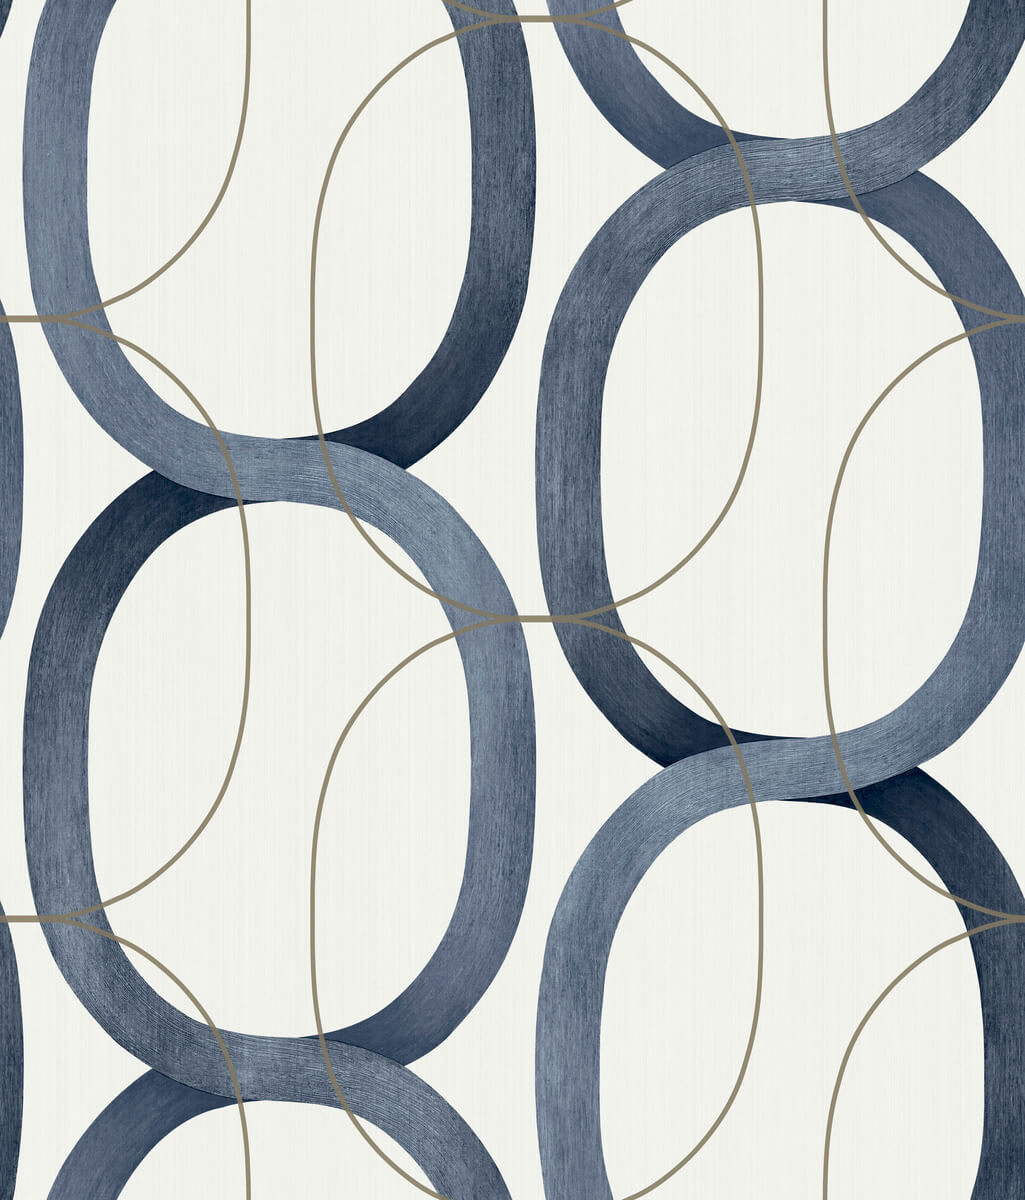 Candice Olson Modern Nature Second Edition Wallpaper Collection - SAMPLE